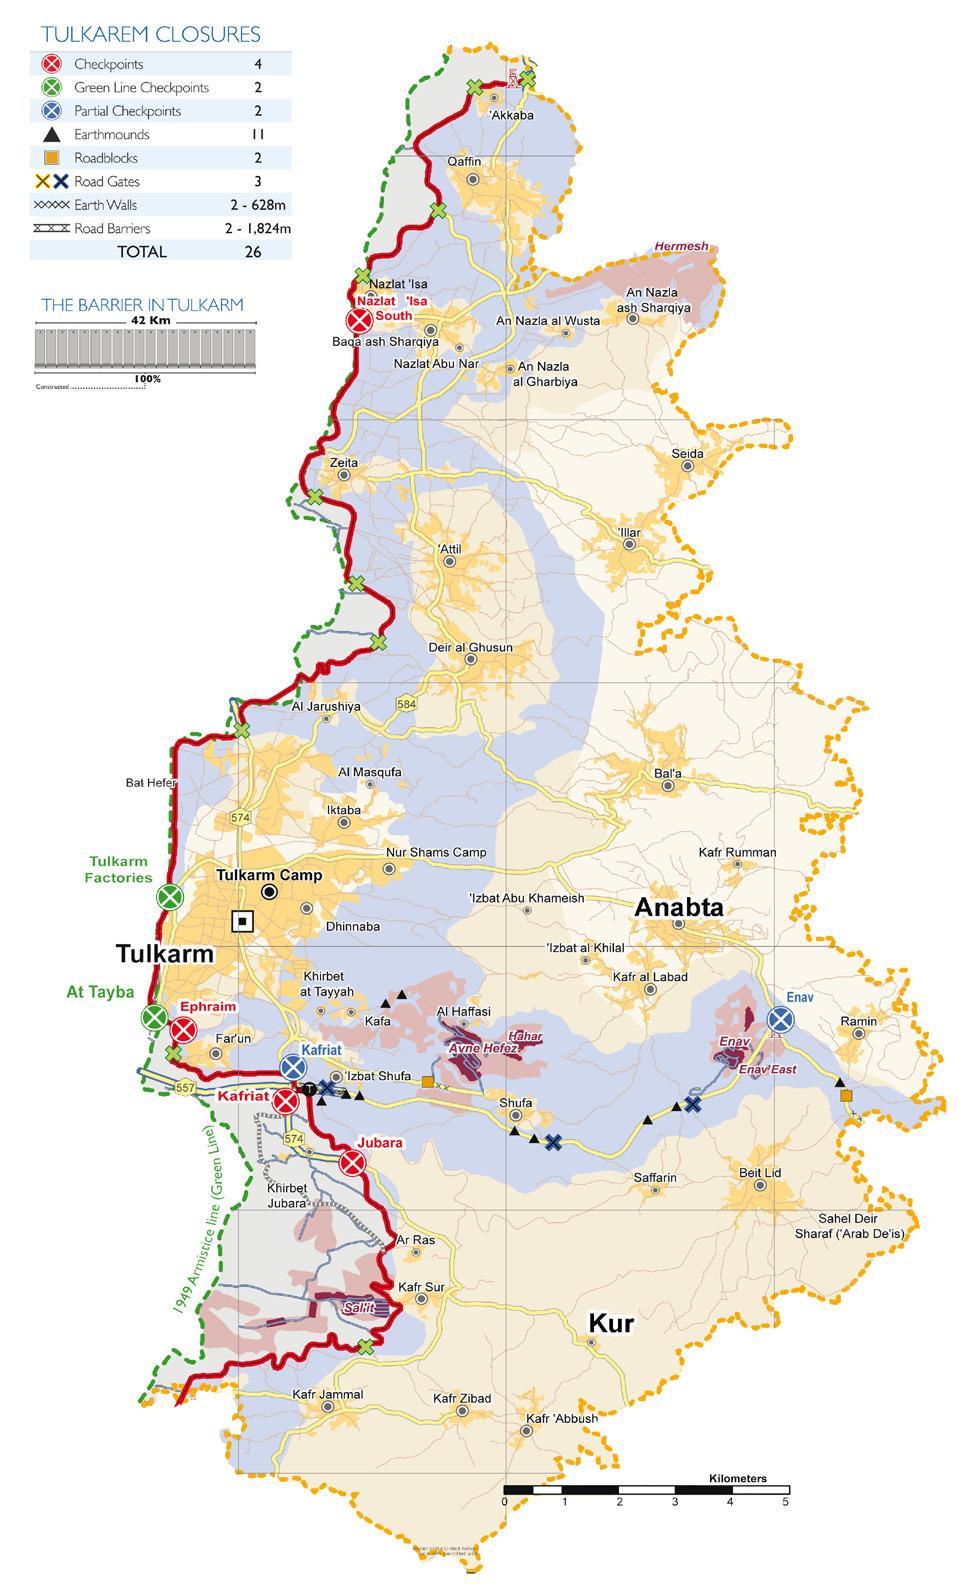 So, almost the 40% of the whole West Bank is occupied by Israel s infrastructures 1, included settlements and roads that connect them, and the Separation barrier along its border.